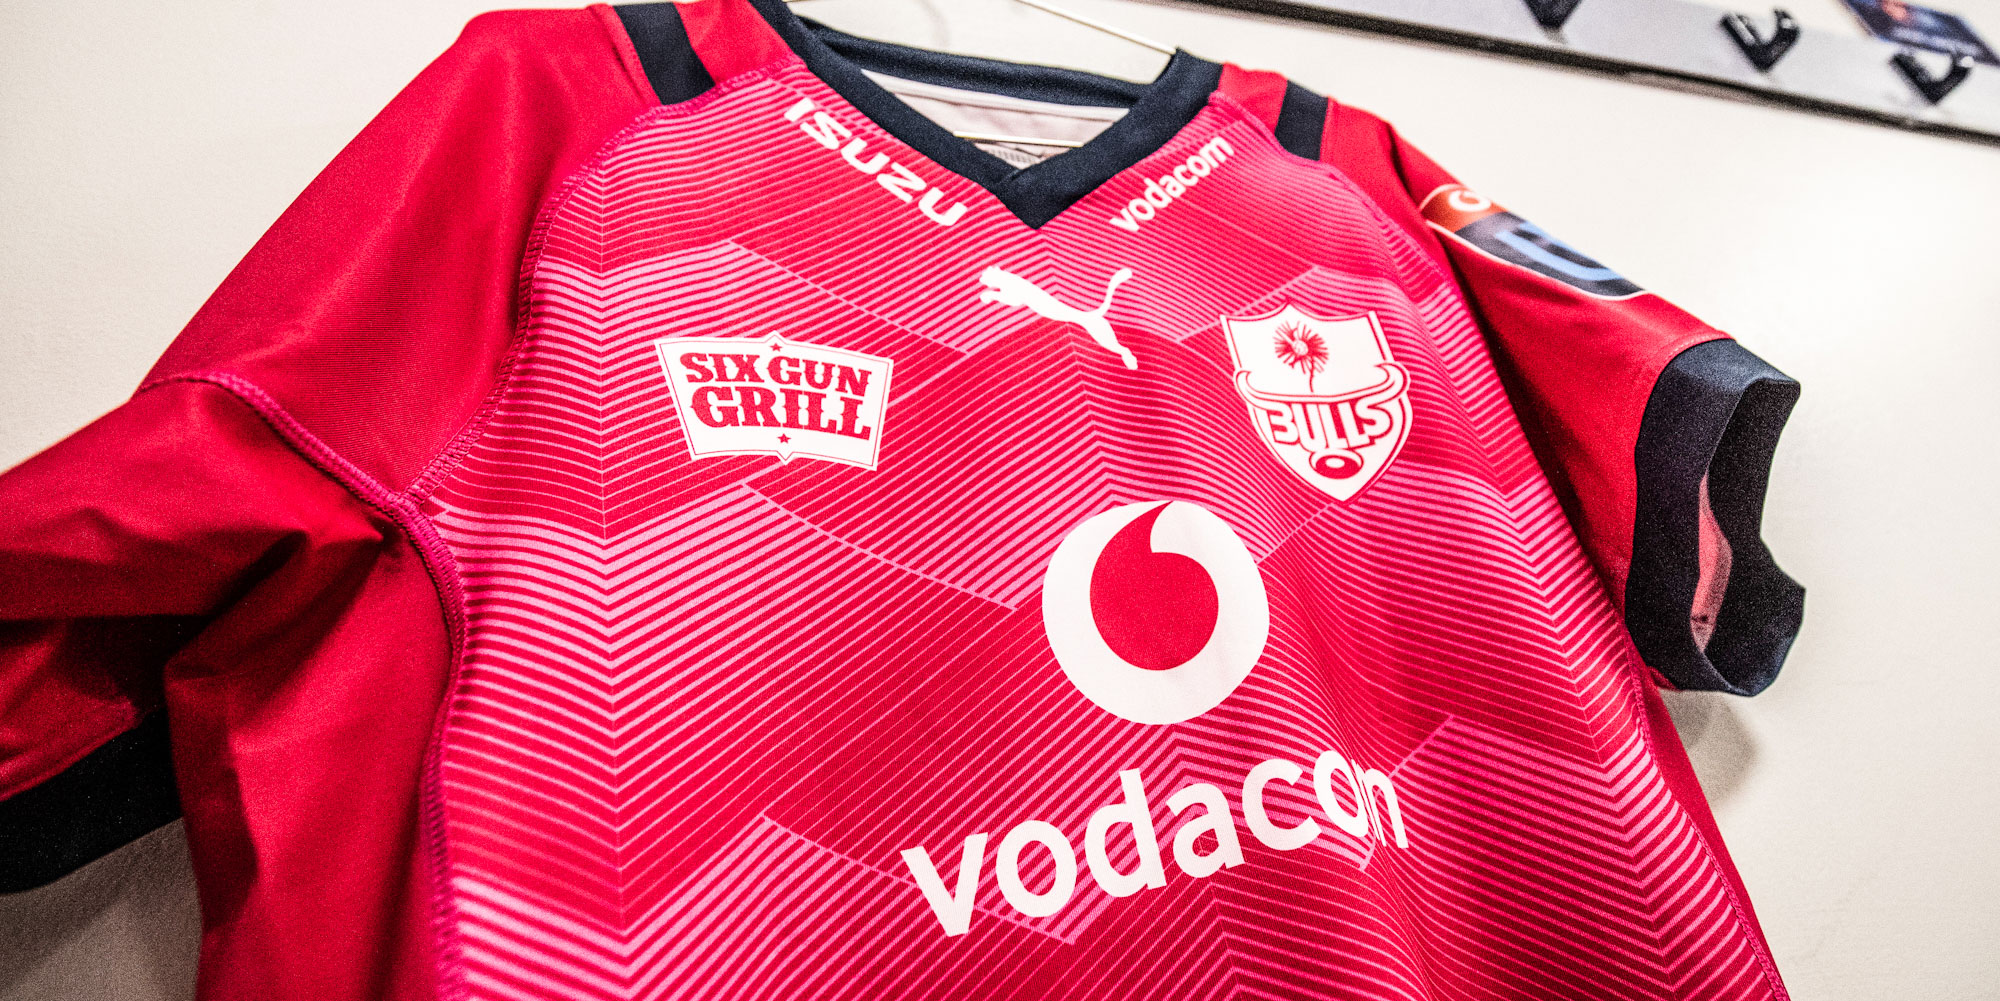 The Vodacom Bulls will play in pink to put some focus on Breast Cancer Awareness month.